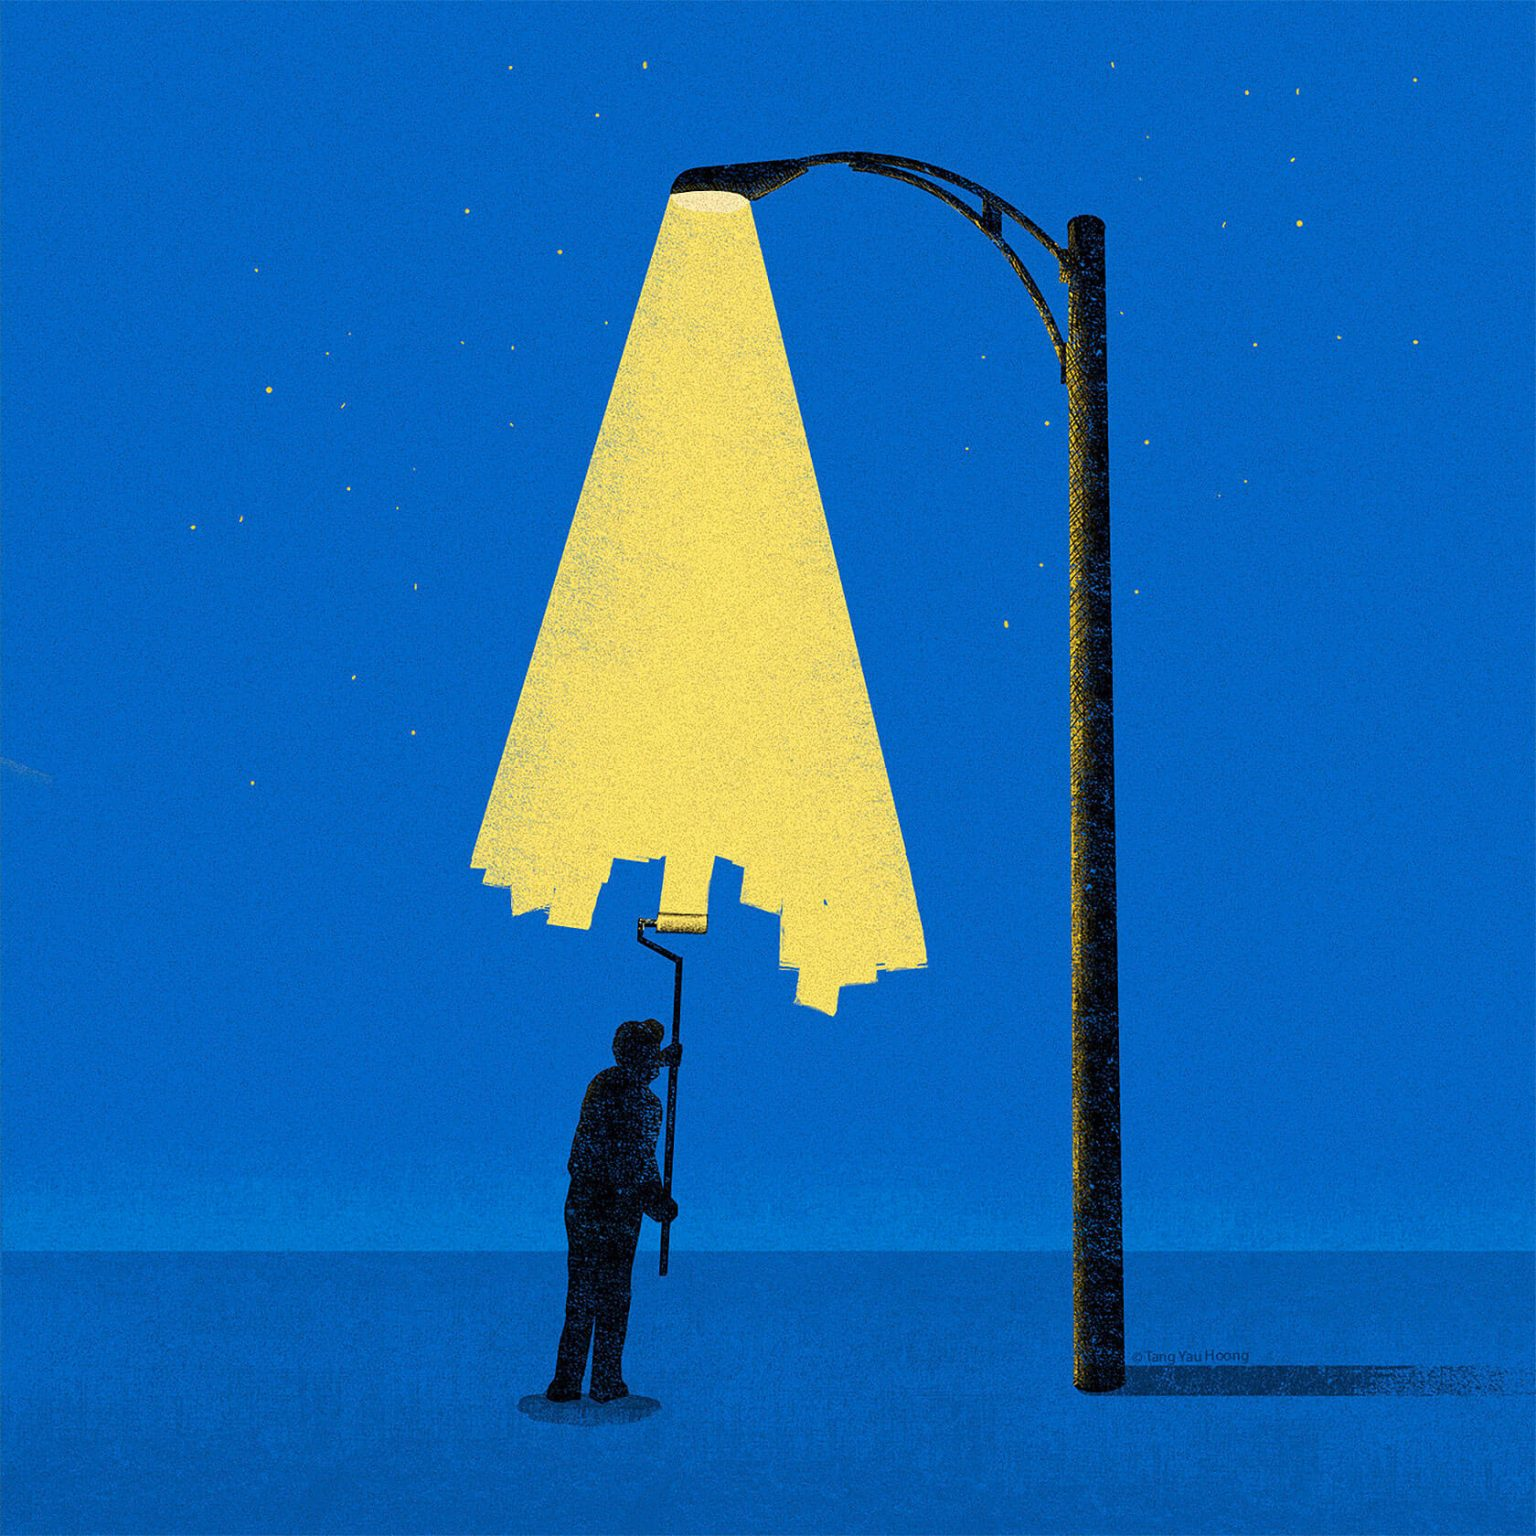 The alluring storytelling of negative space by Tang Yau Hoong